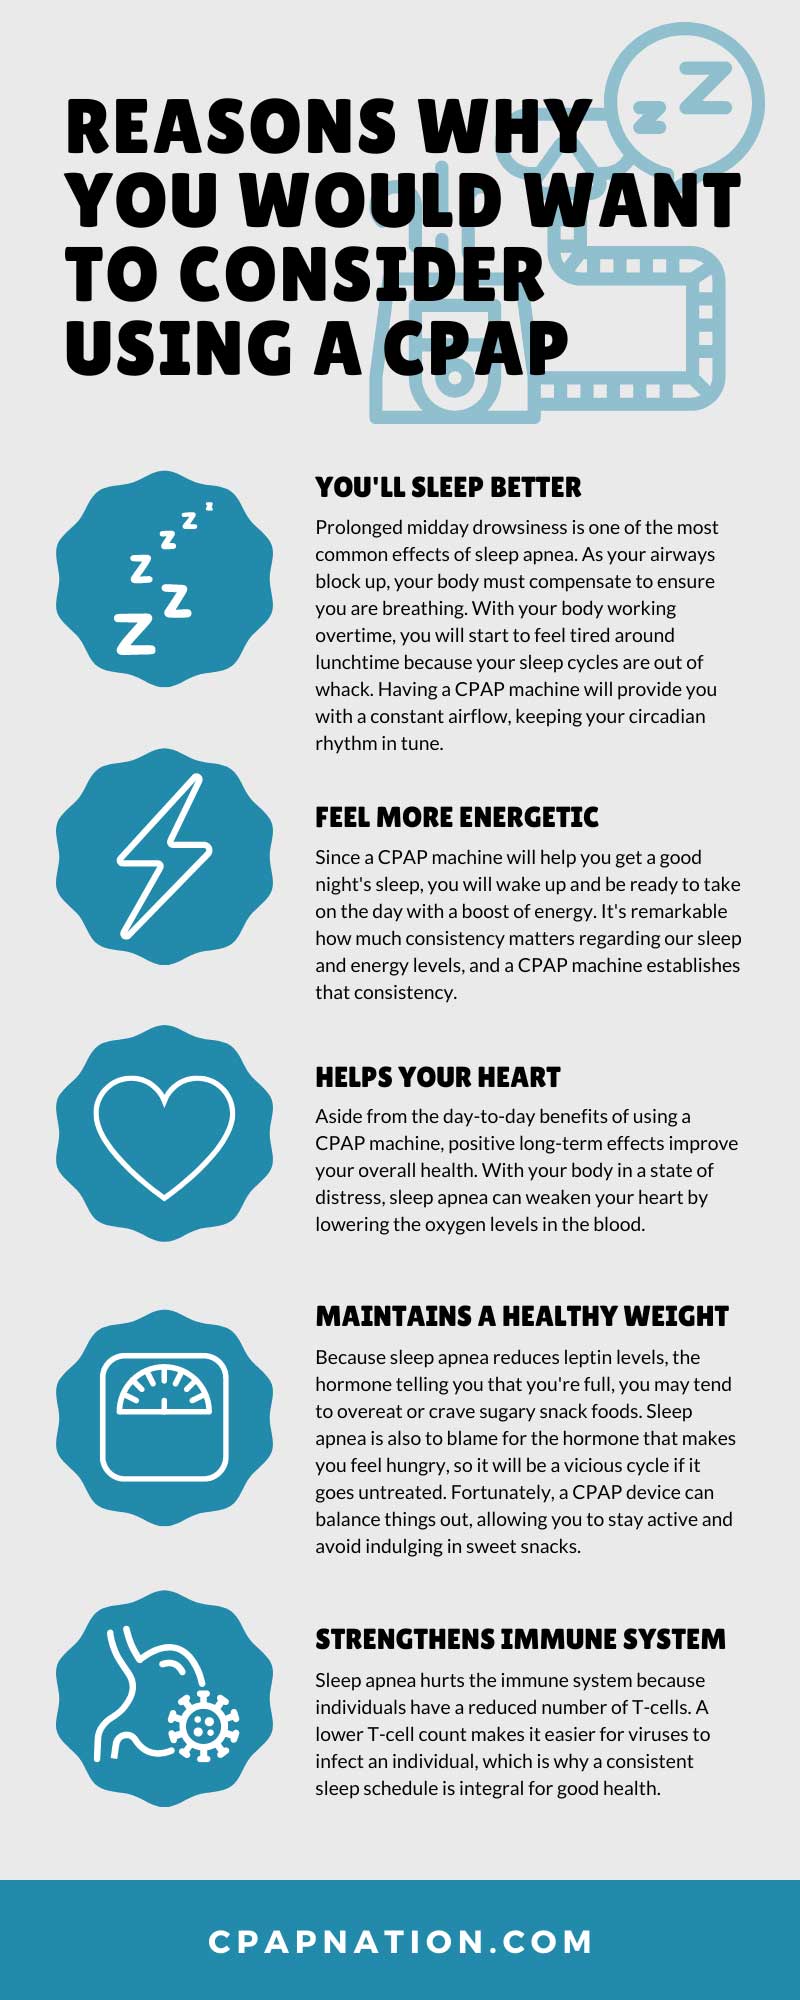 10 Reasons Why You Would Want To Consider Using a CPAP